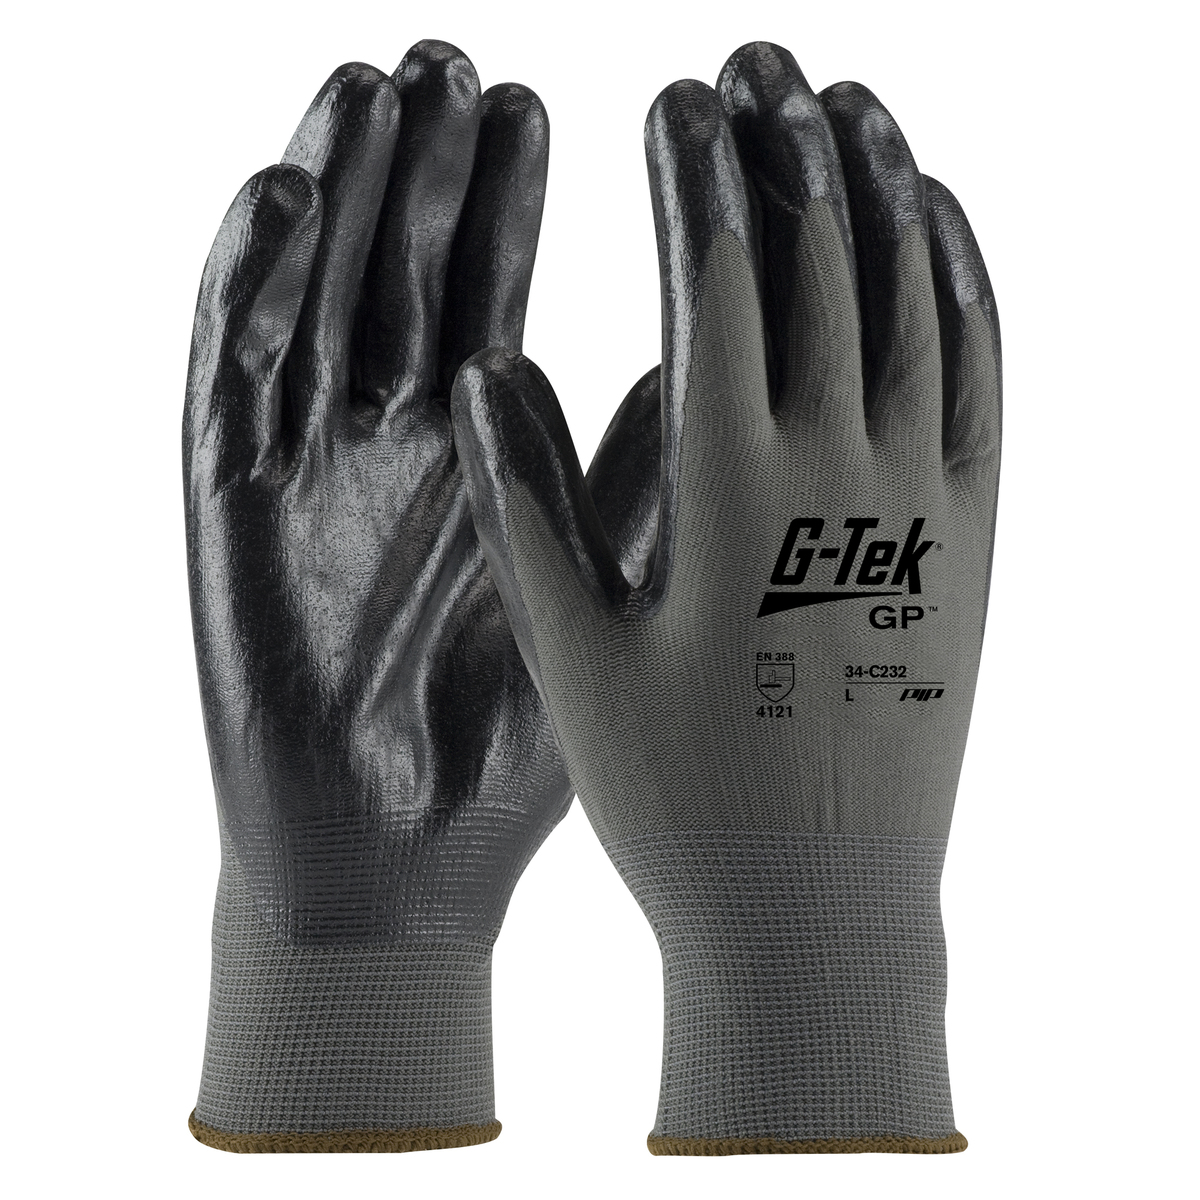 PIP® Small G-Tek® GP™ 13 Gauge Black Nitrile Palm And Finger Coated Work Gloves With Nylon Liner And Continuous Knit Wrist